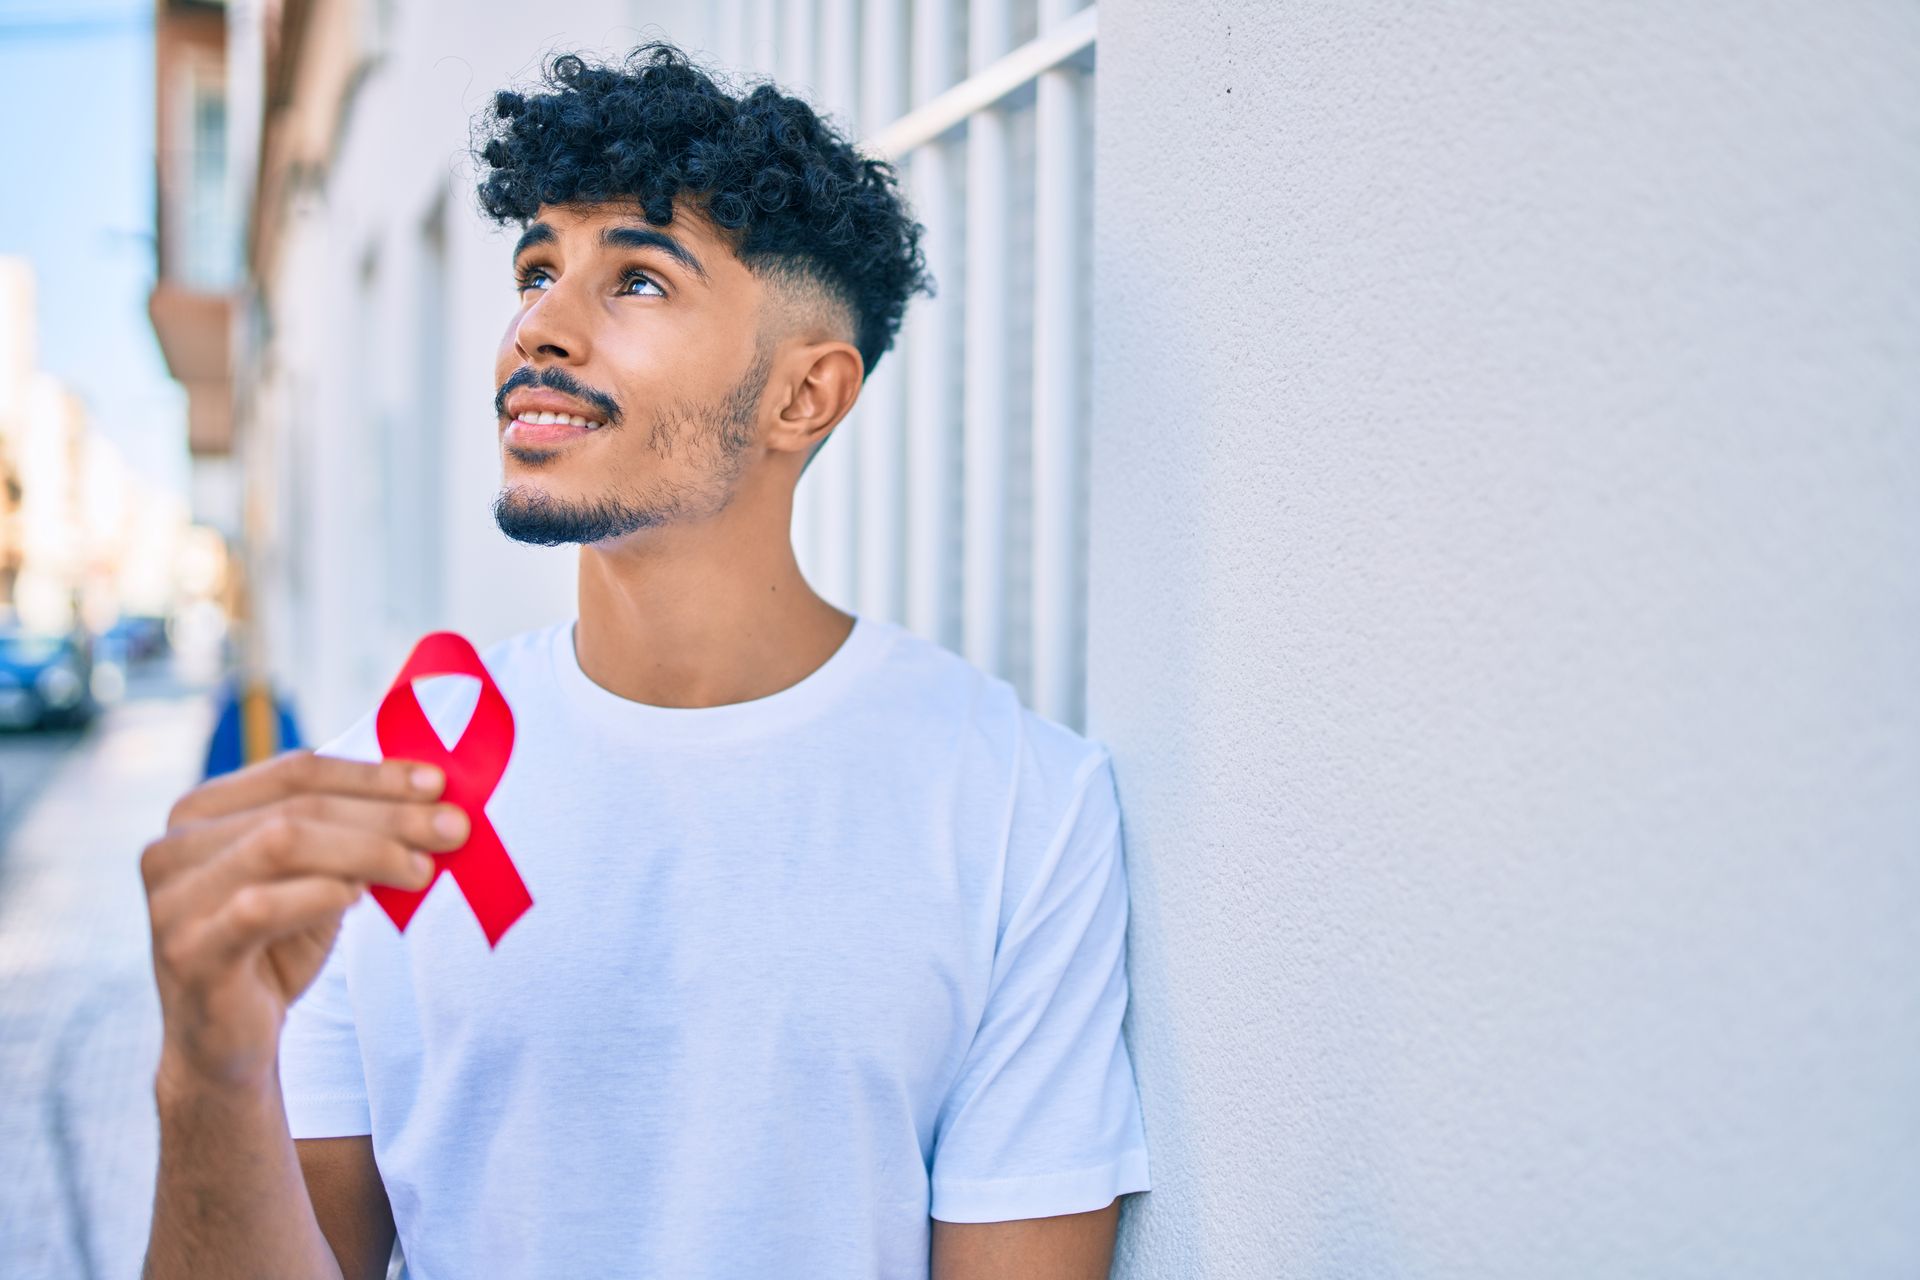 Living with HIV and or AIDS